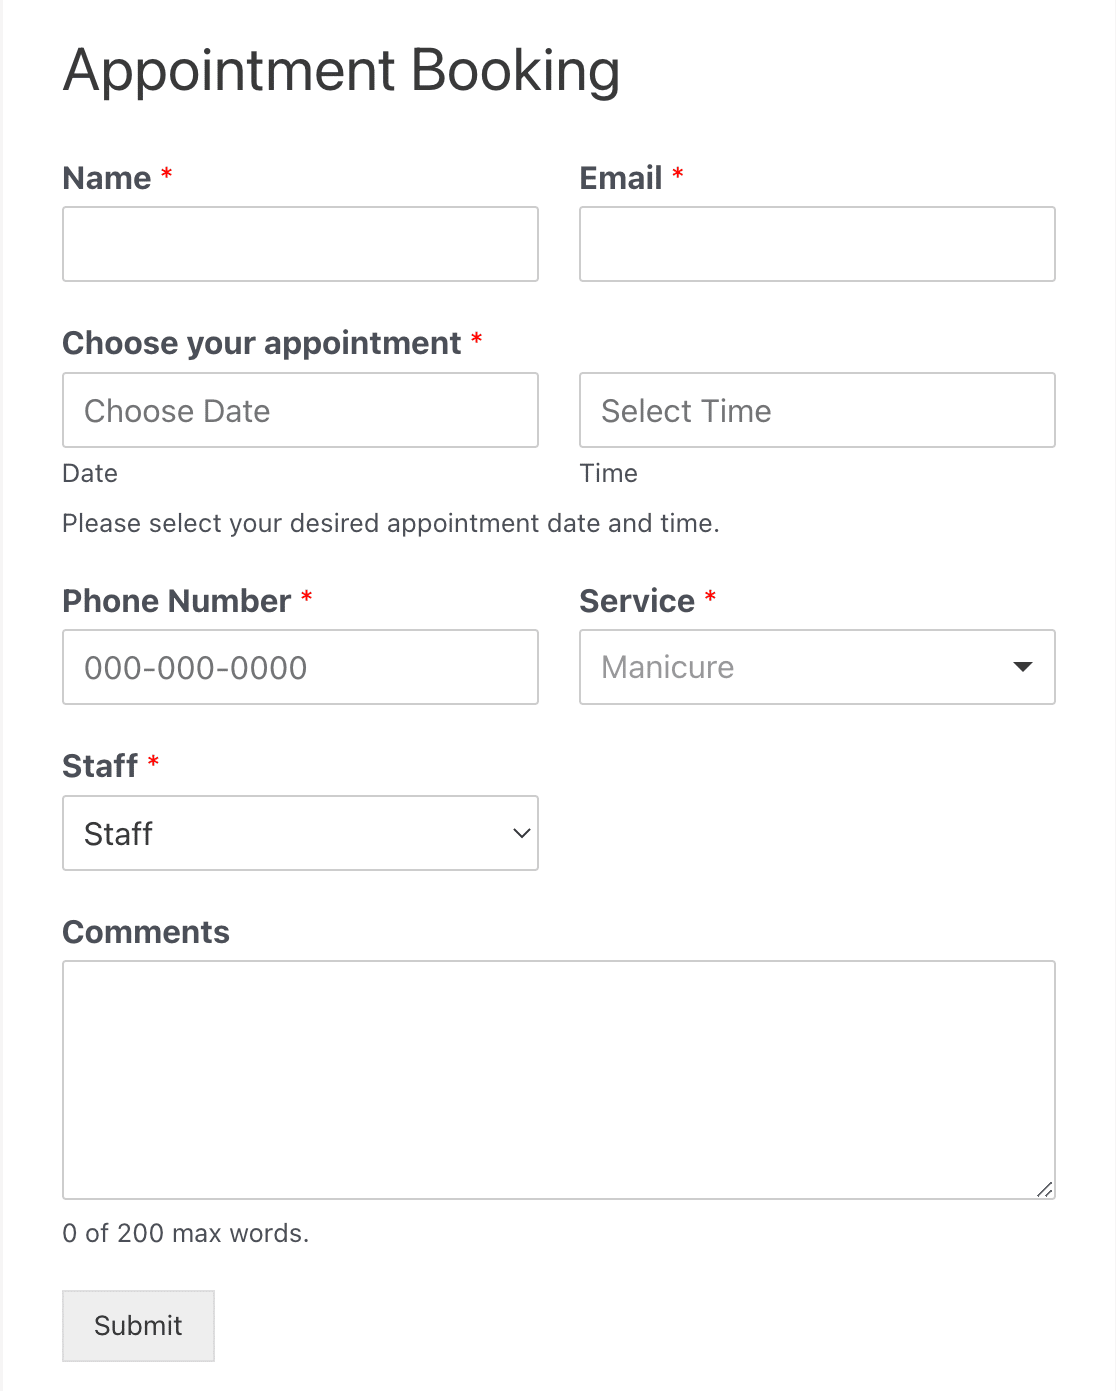 An appointment booking form